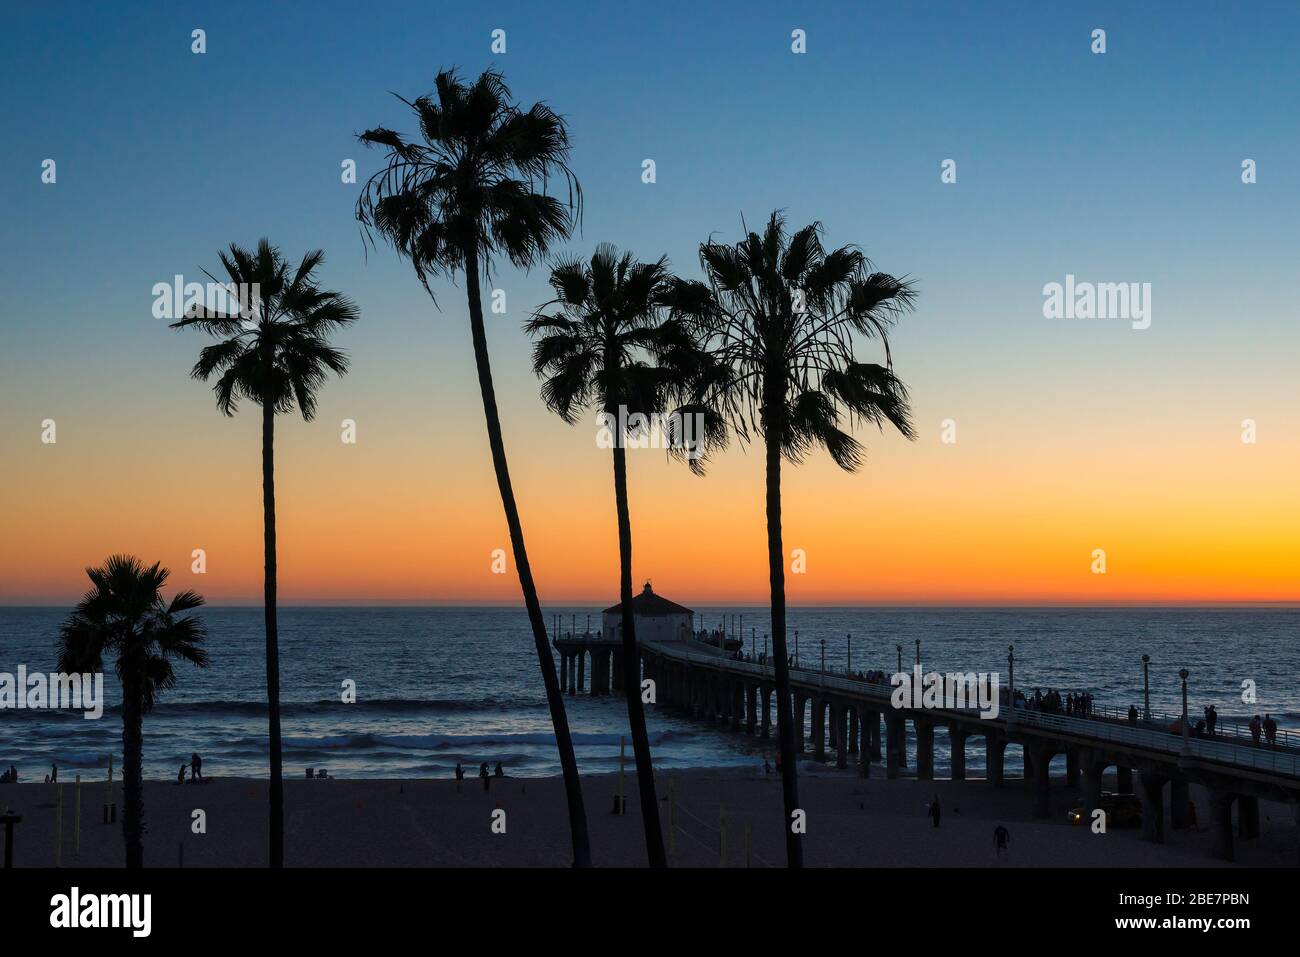 Palm trees over the tropical beach at sunset, California Stock Photo